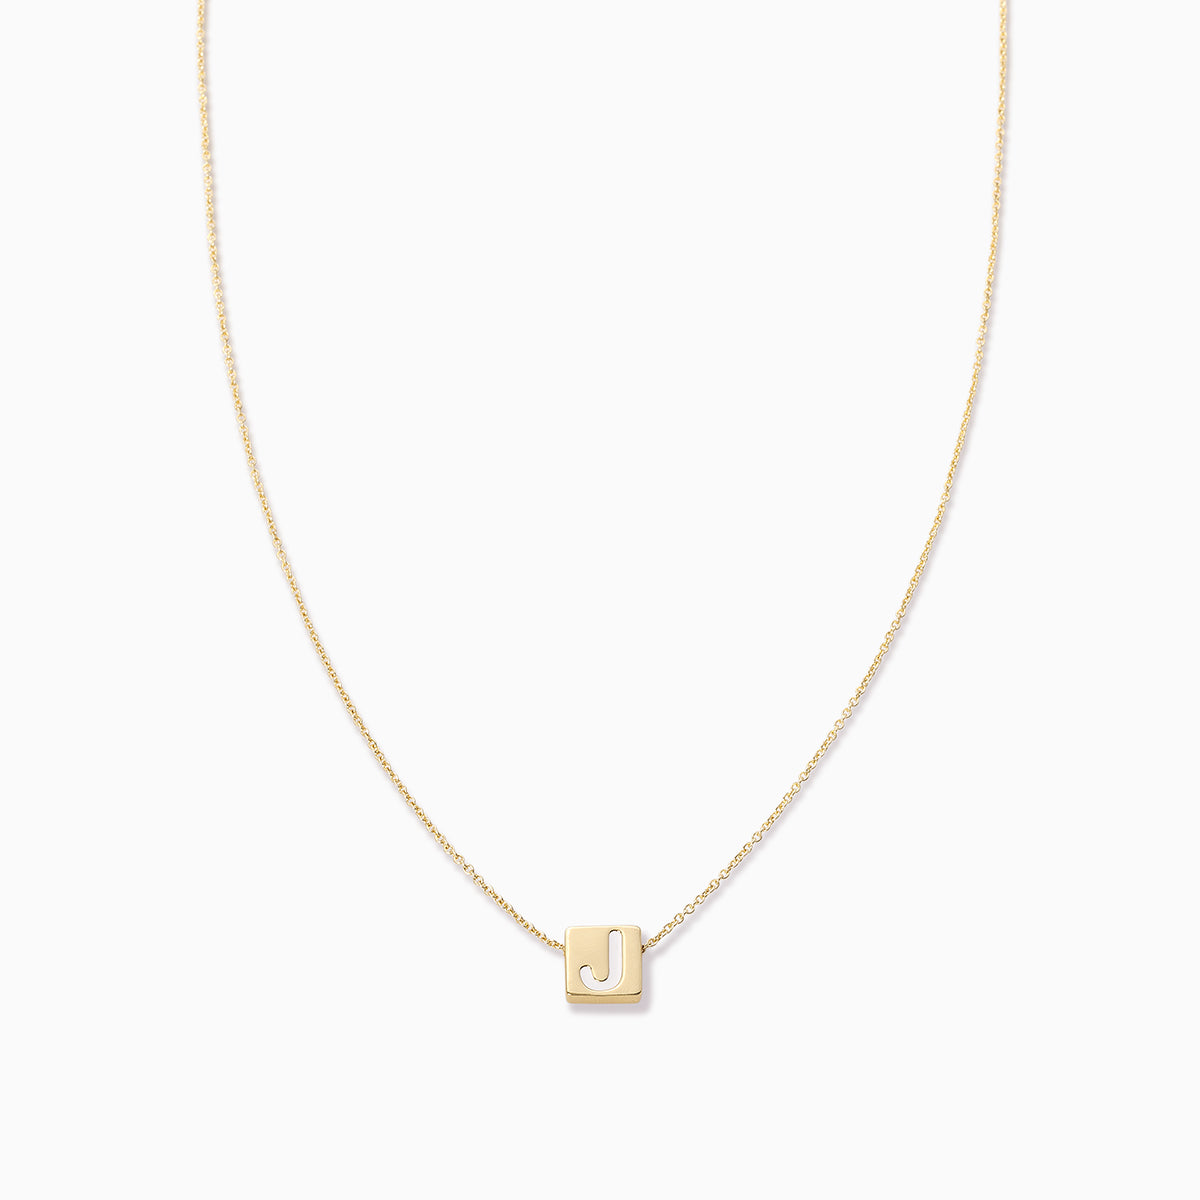 Bold Letter Necklace | Gold J | Product Image | Uncommon James